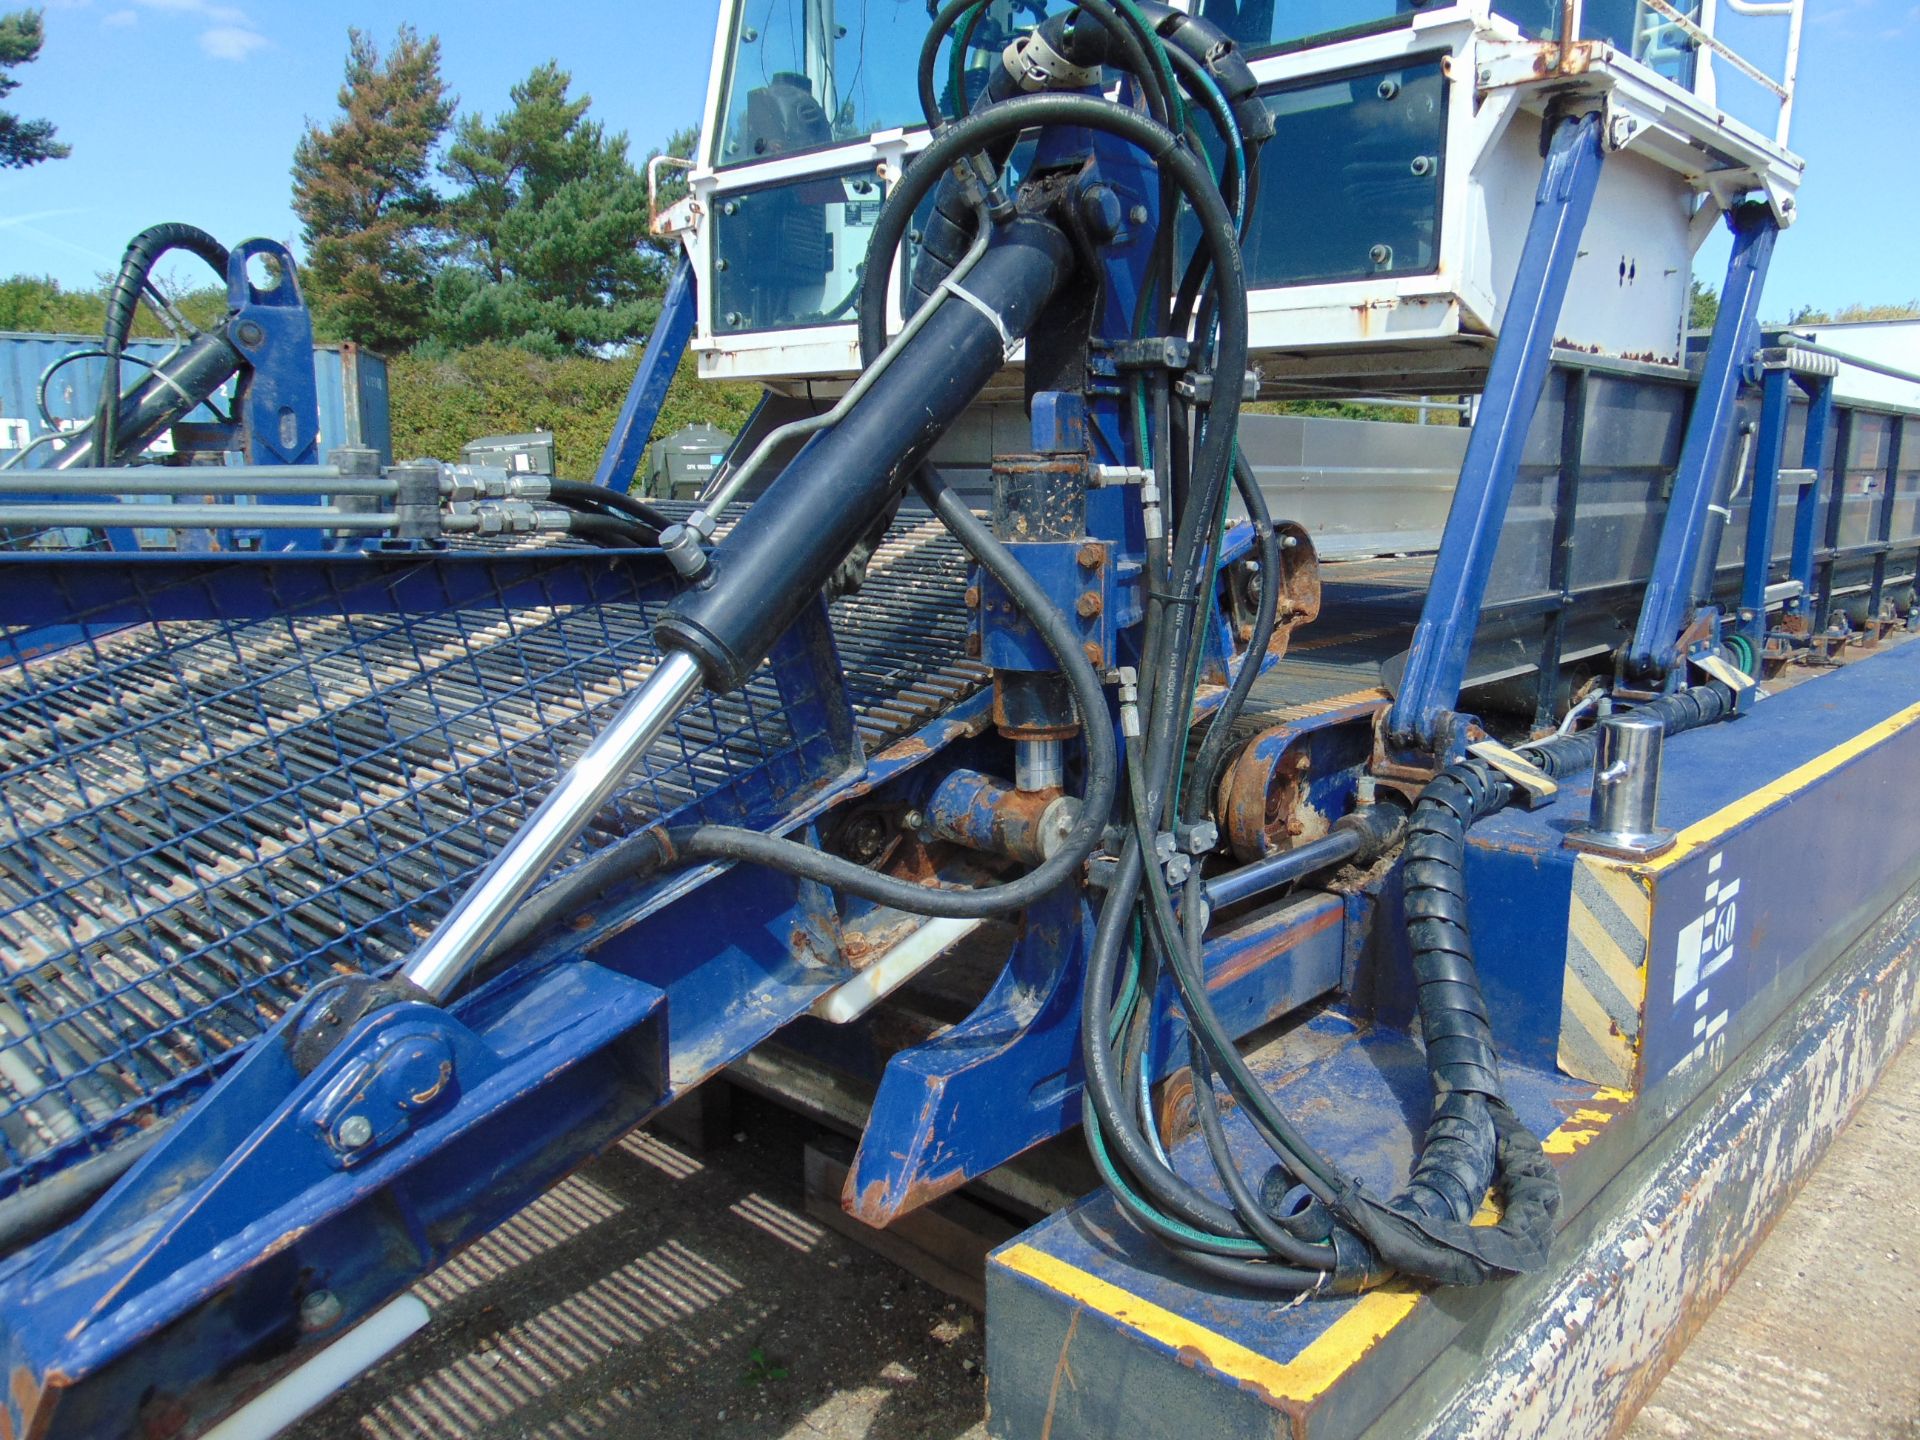 2012 Berky Type 6530 Aquatic Weed Harvester from the UK Environment Agency - Image 13 of 34